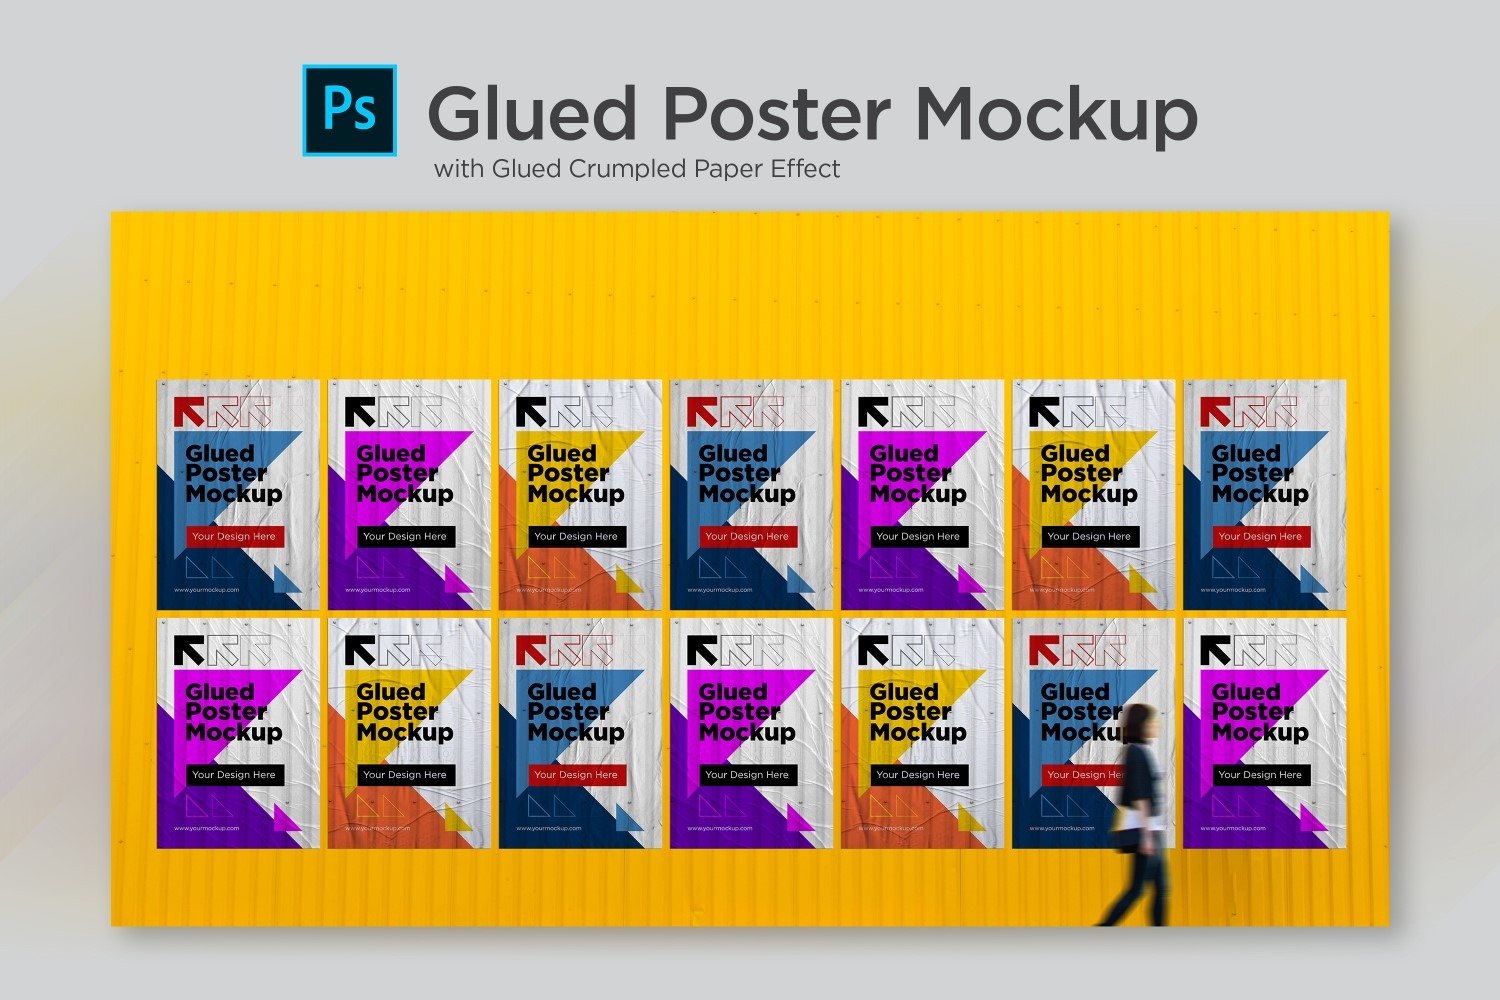 Glued and Crumpled Poster Mockup Effects Product Mockup